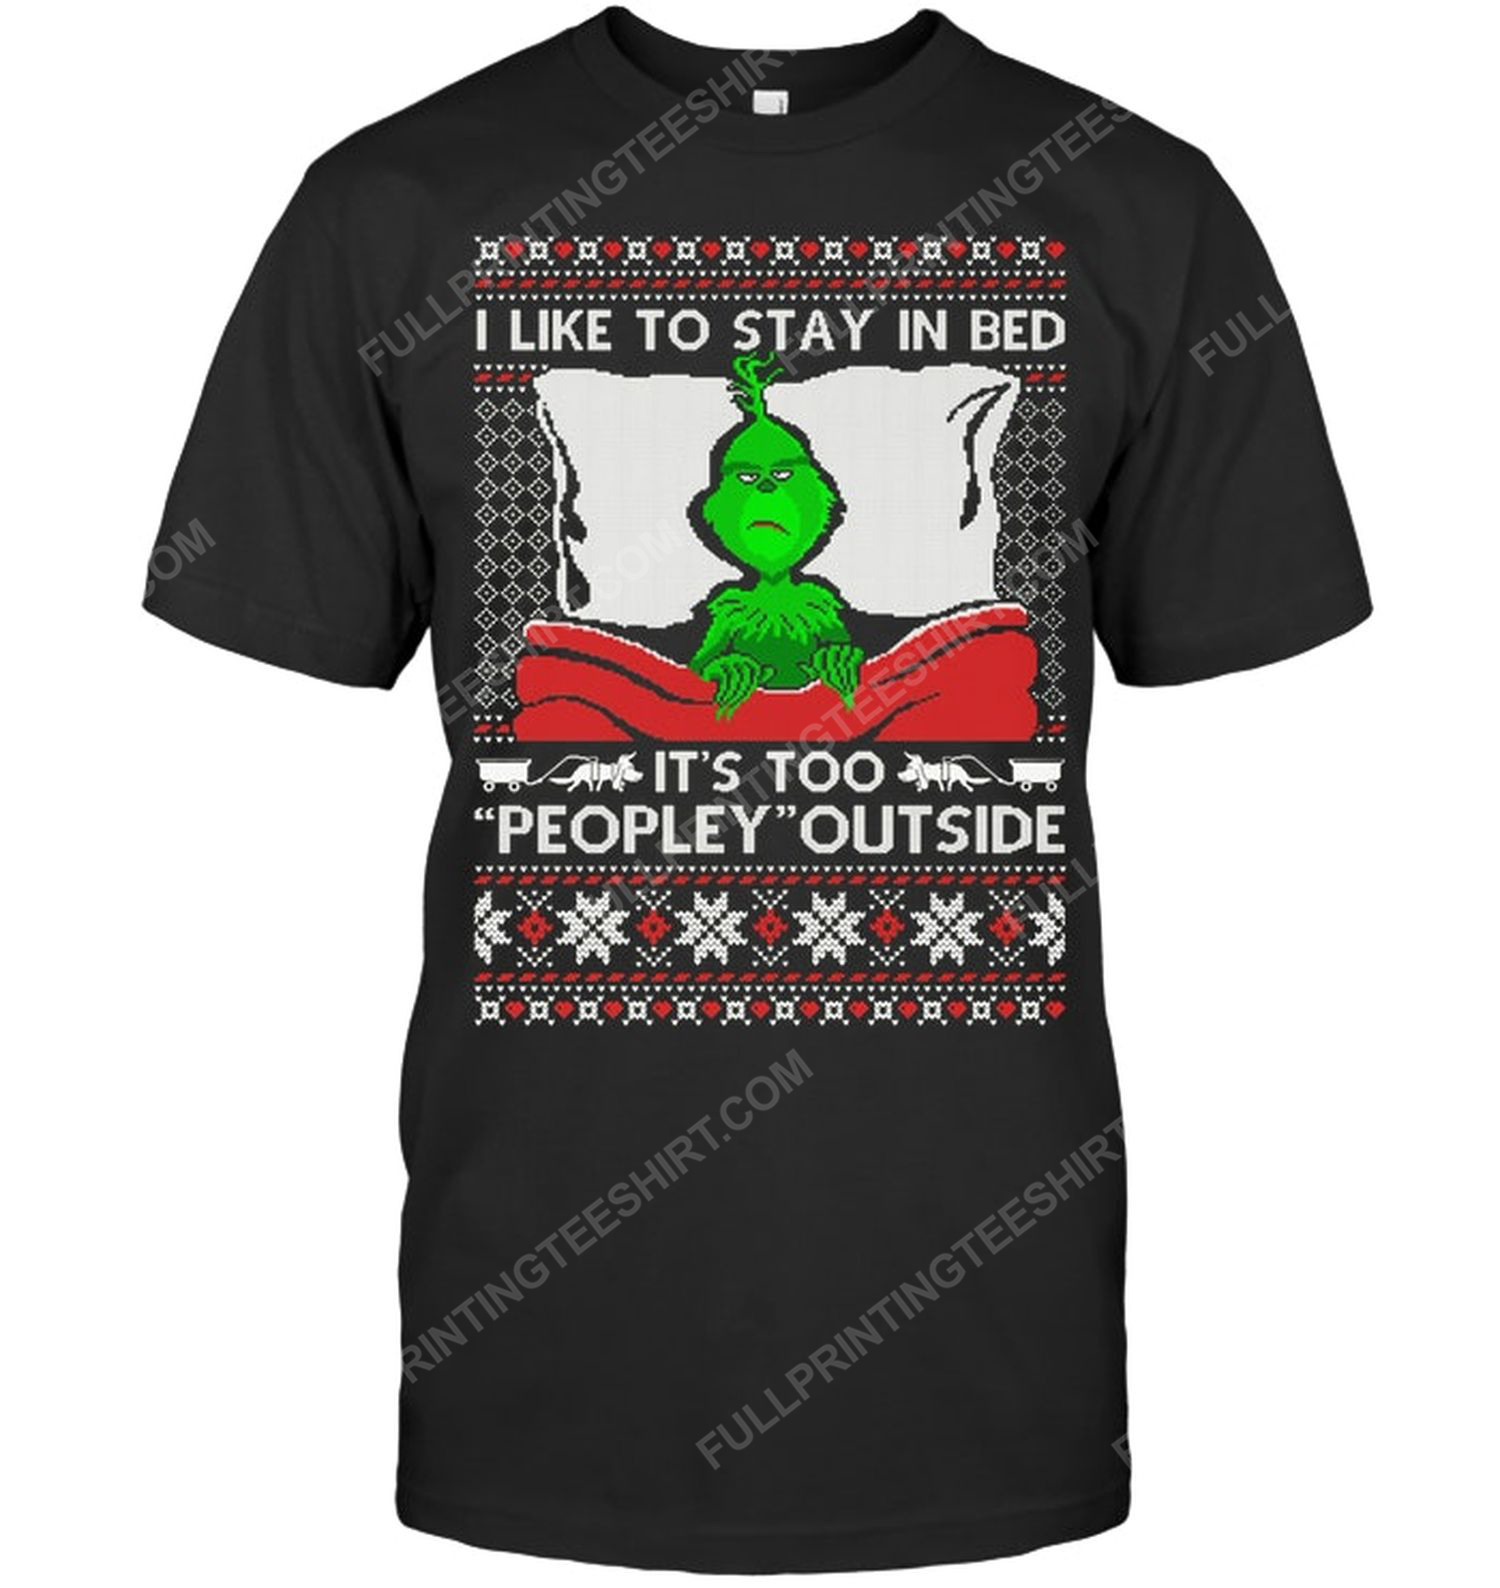 I like to stay in bed it's peopley outside grinch tshirt